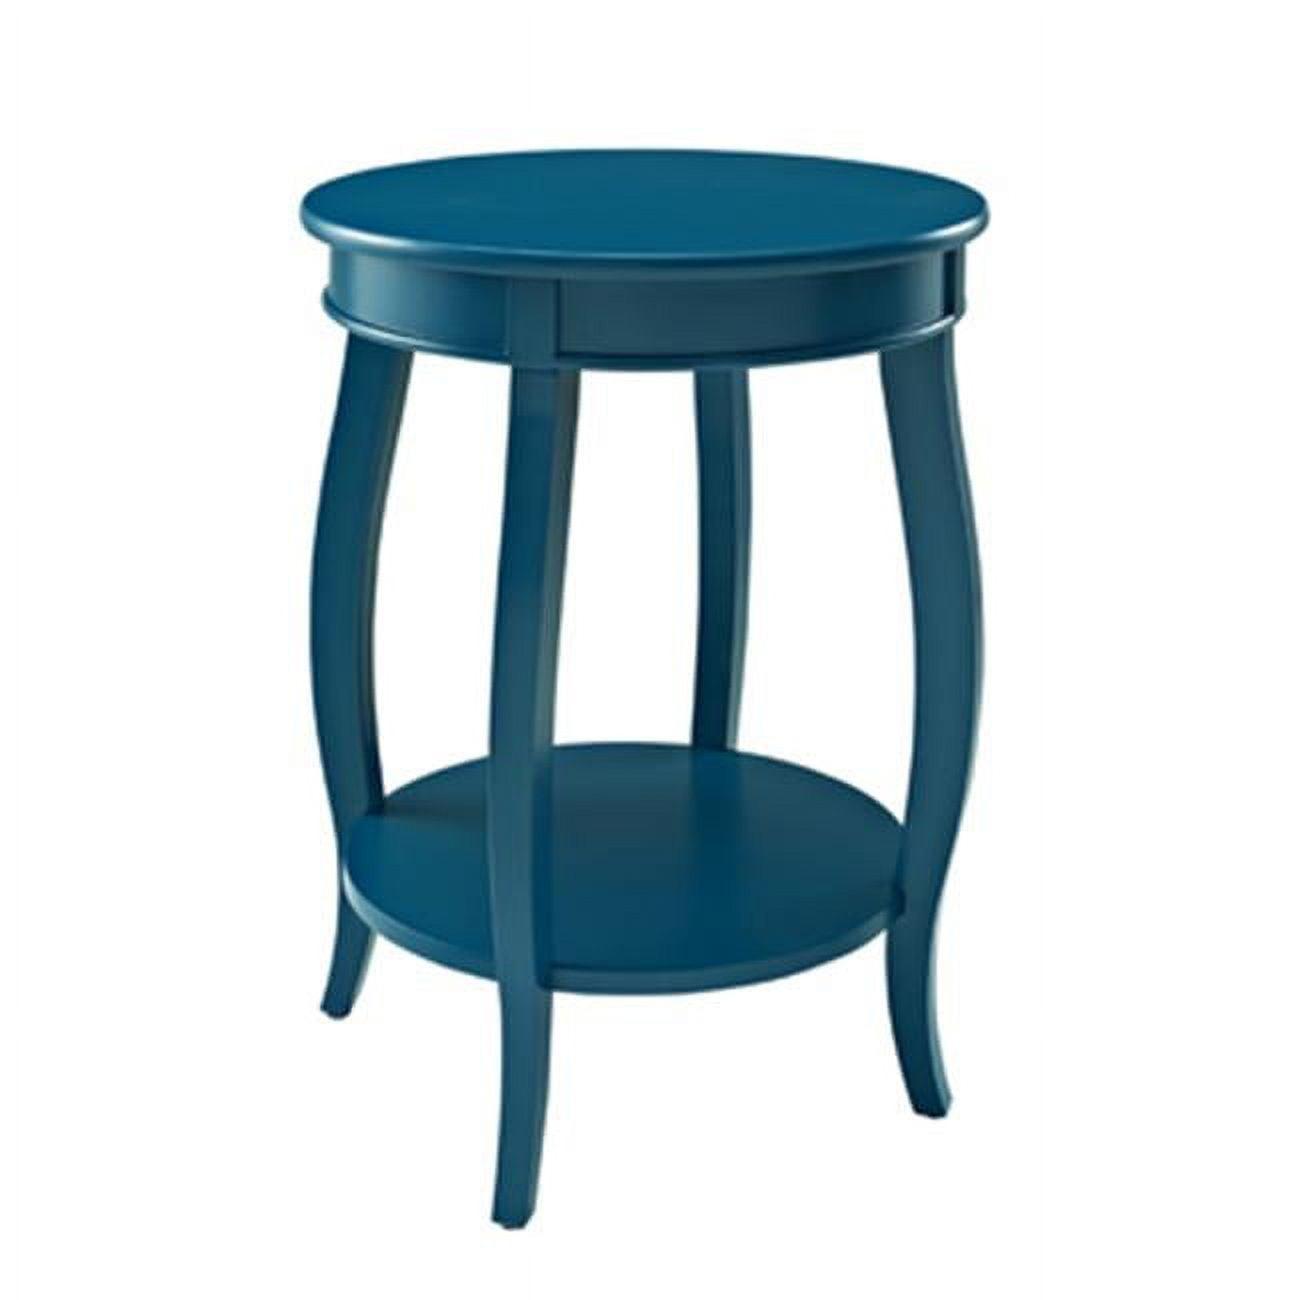 Teal Bohemian Round Wood Accent Table with Shelf